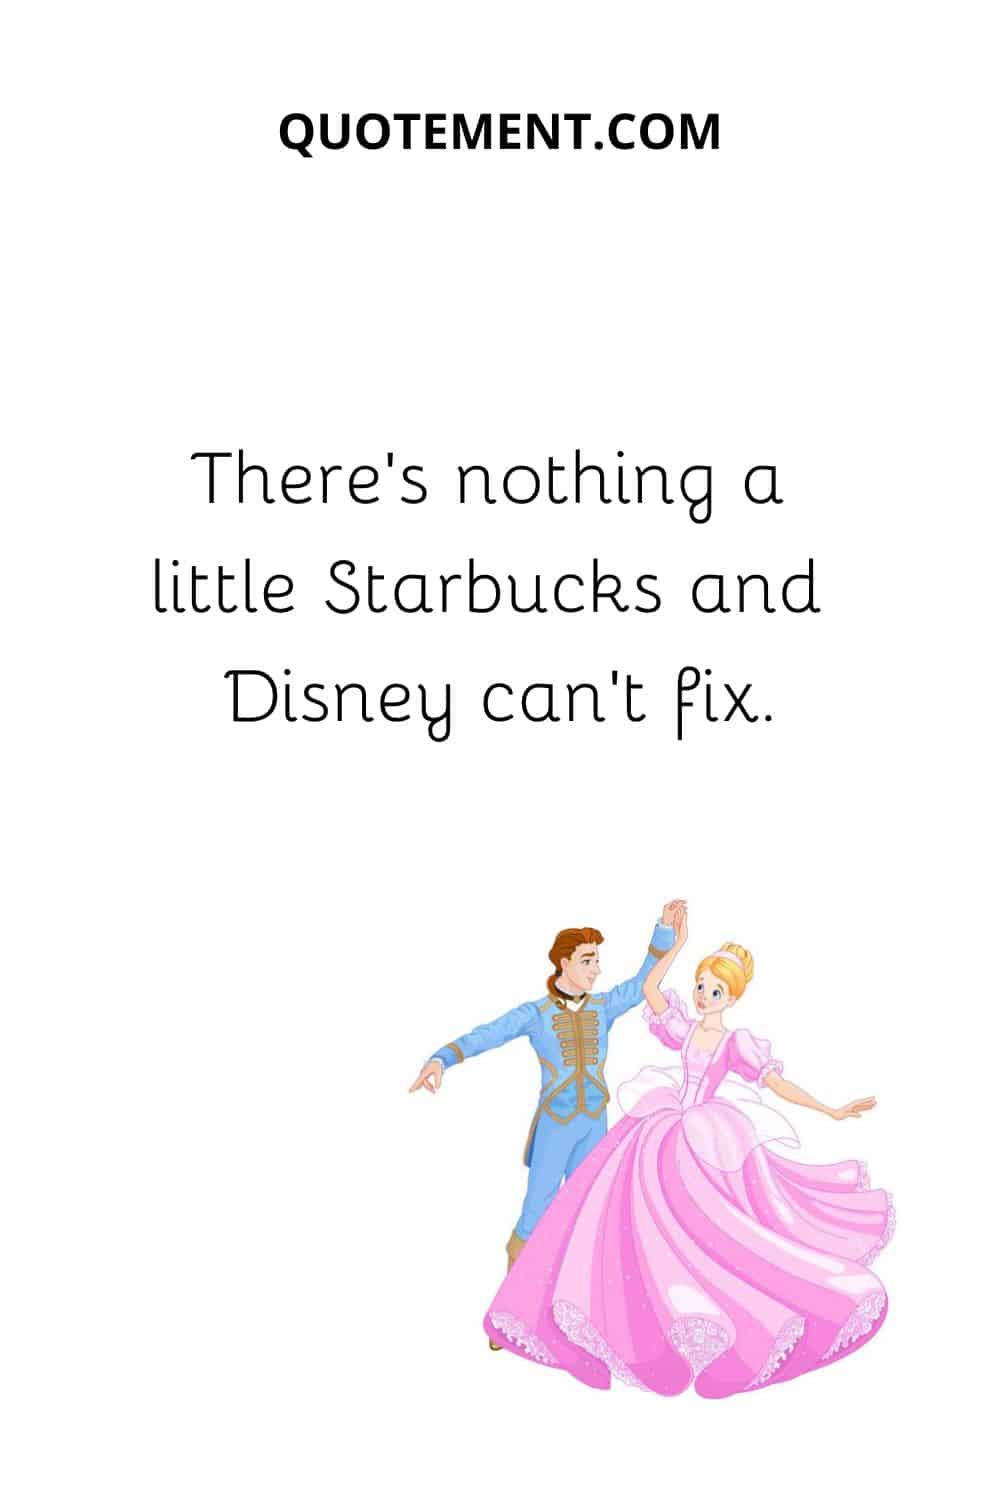 There’s nothing a little Starbucks and Disney can’t fix